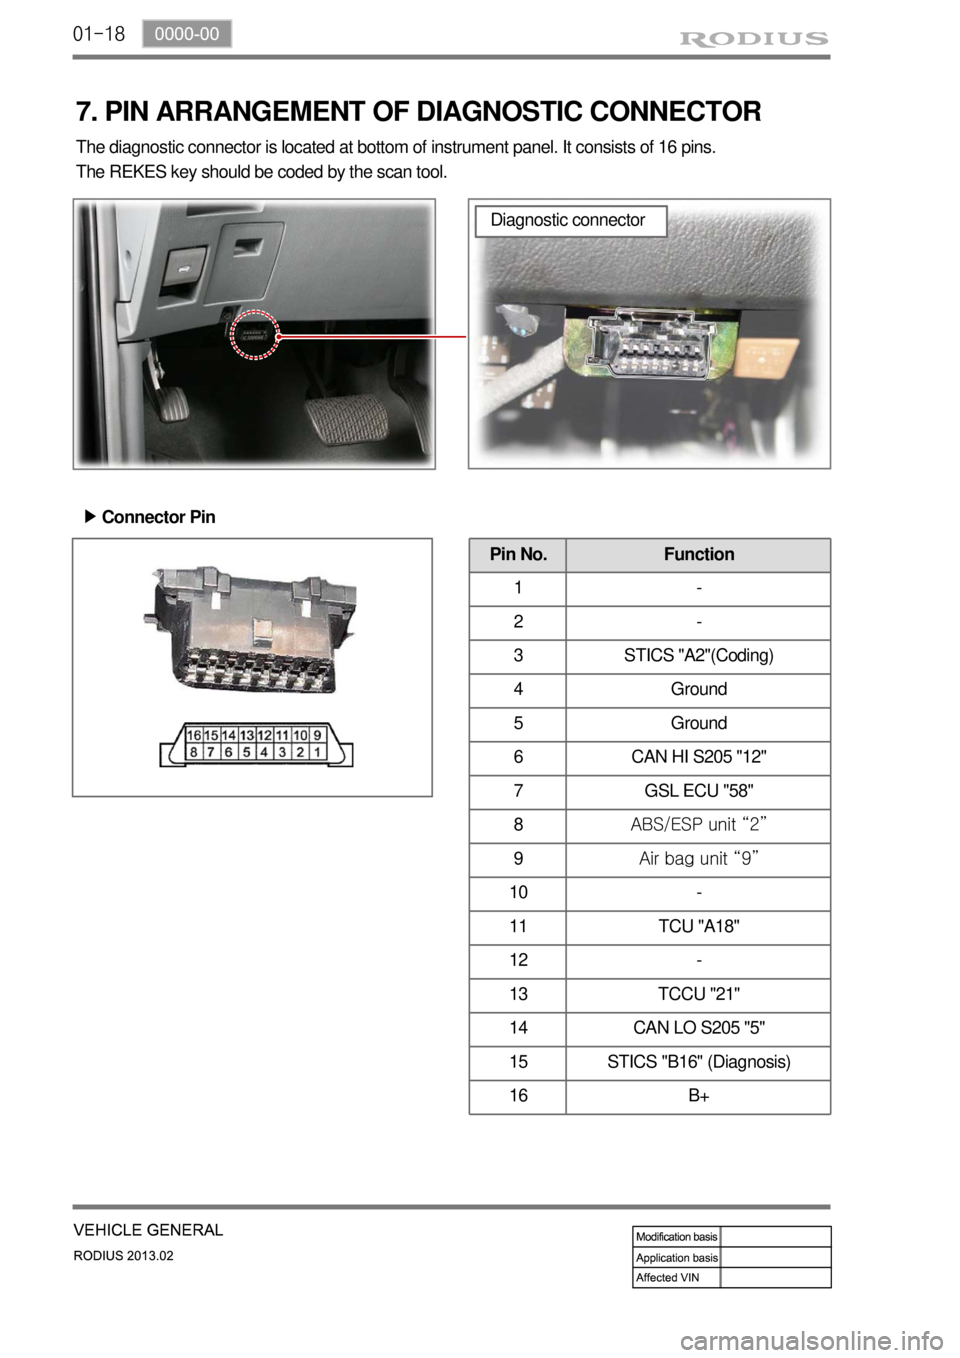 SSANGYONG TURISMO 2013  Service Manual 01-18
The diagnostic connector is located at bottom of instrument panel. It consists of 16 pins.
The REKES key should be coded by the scan tool.
Connector Pin ▶
Diagnostic connector
Pin No. Function